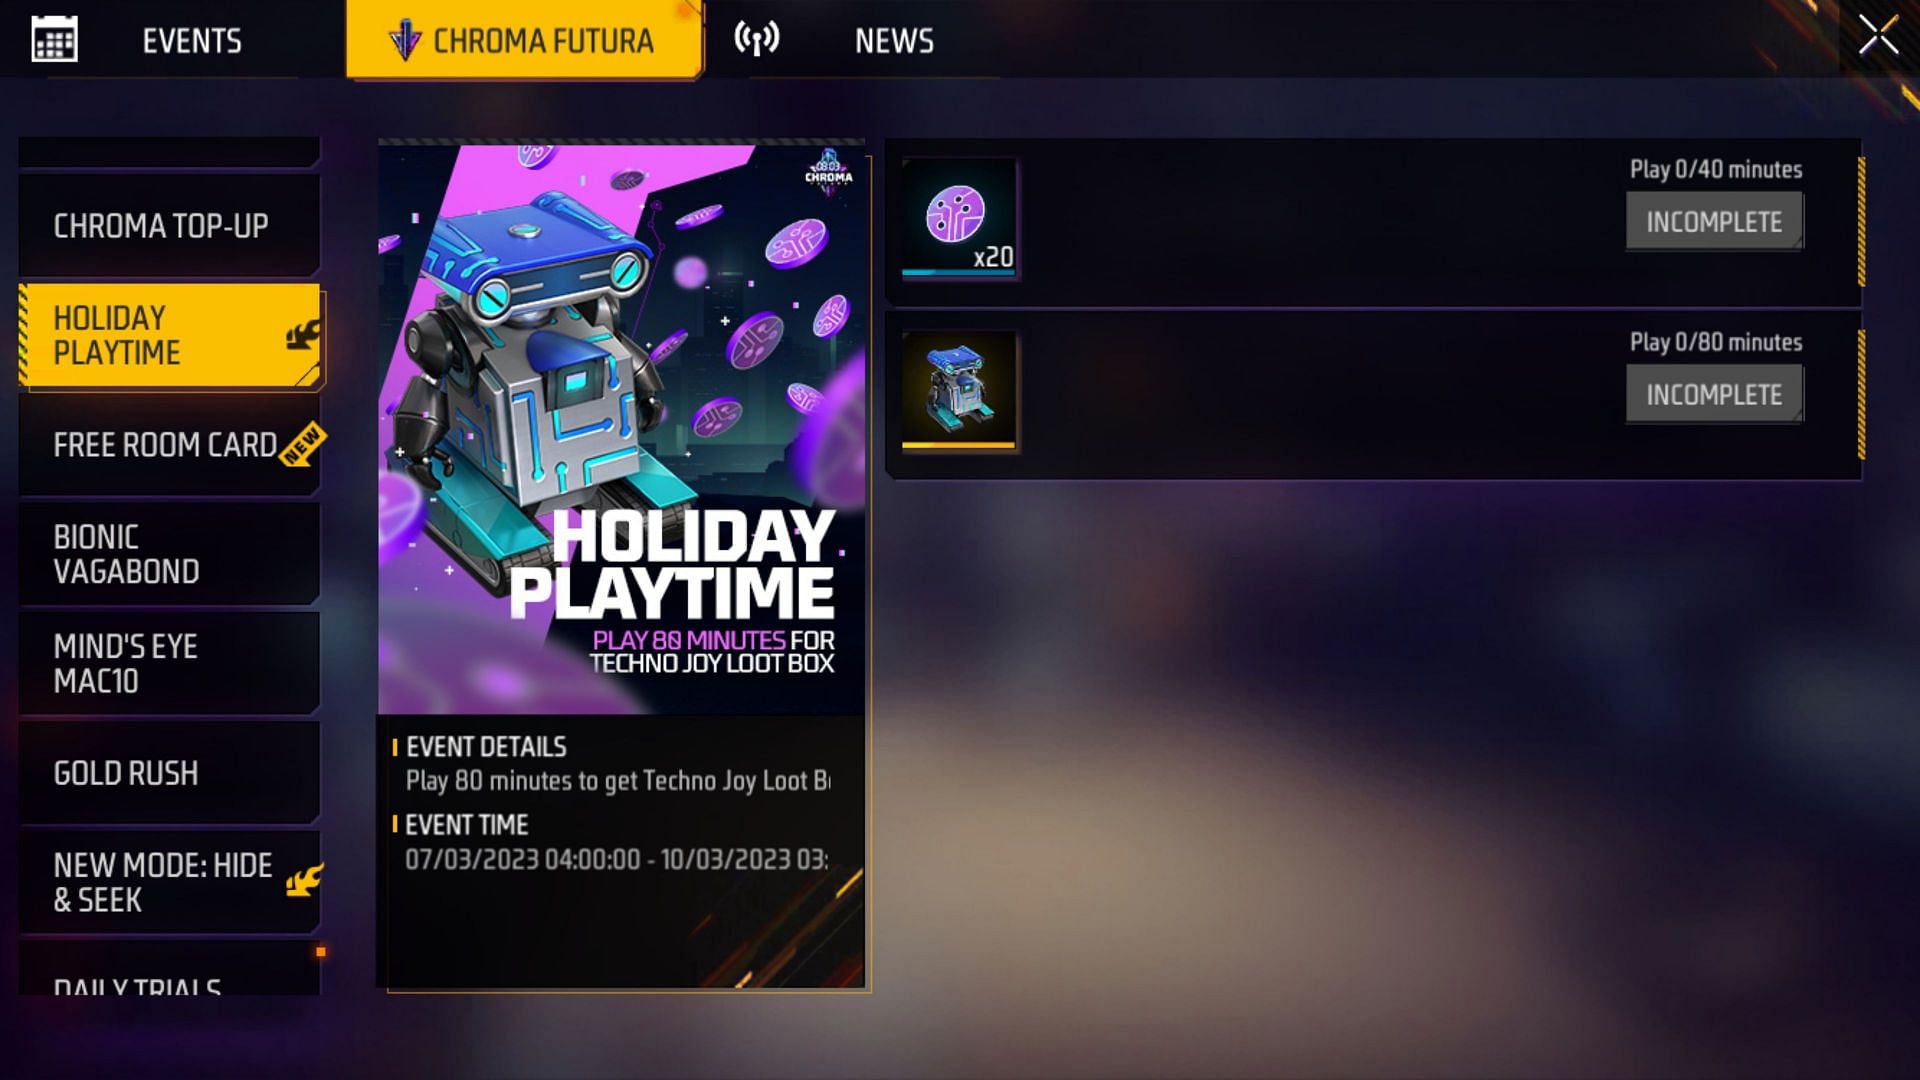 The Holiday Playtime event features two rewards (Image via Garena)